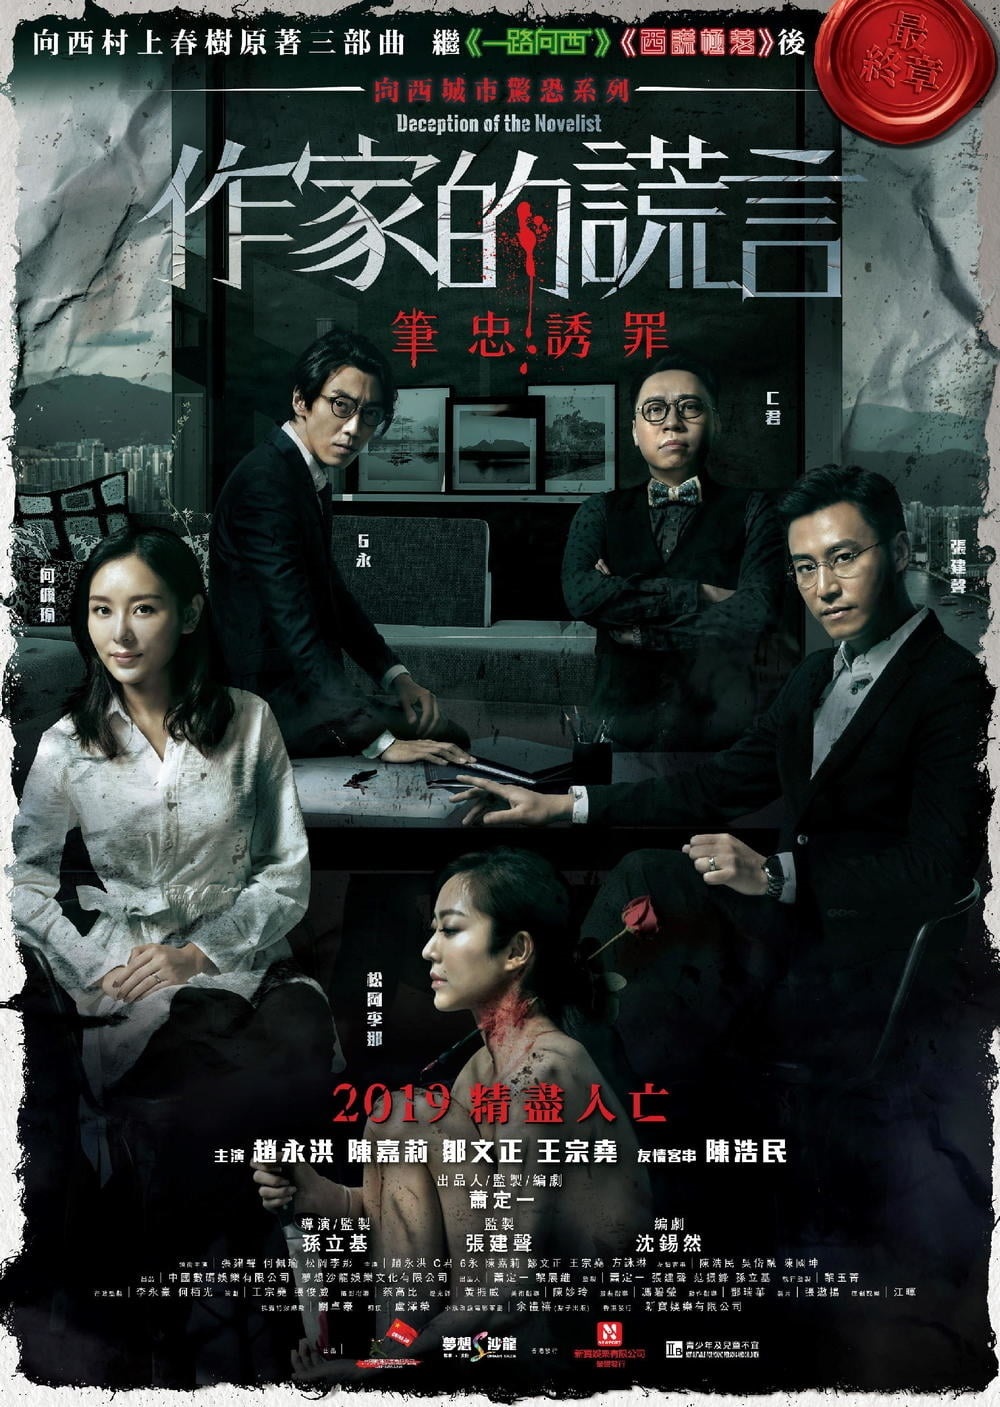 ҵe:PT Deception.Of.The.Novelist.2019.CHINESE.1080p.BluRay.X264-WiKi 11.24GB-1.png